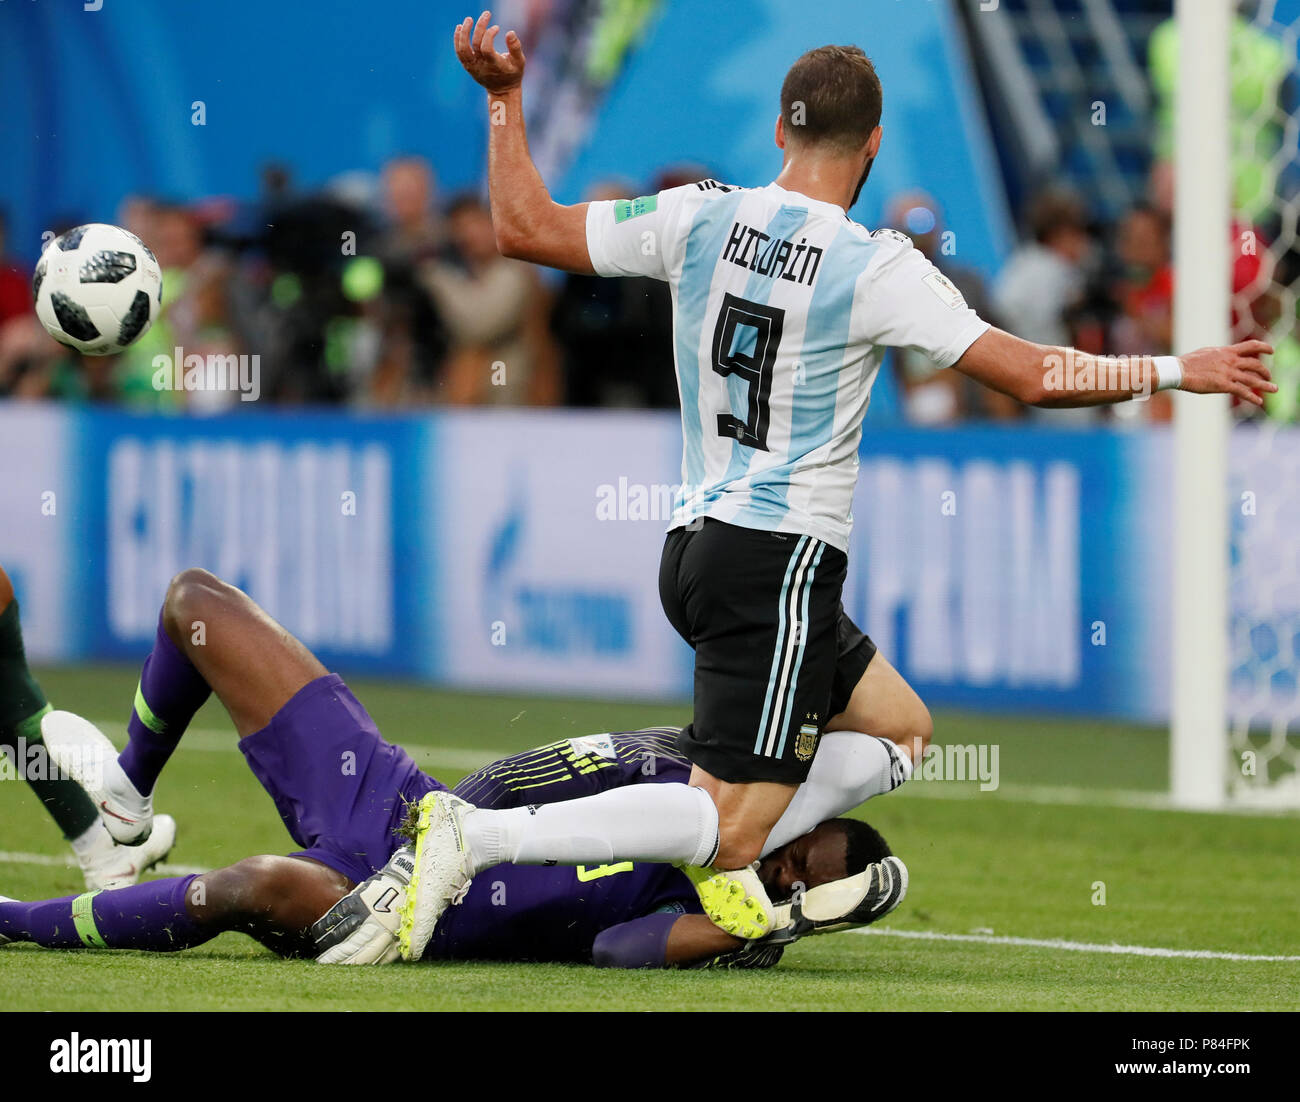 SAINT PETERSBURG, RUSSIA - JUNE 26: Francis Uzoho of Nigeria national team and Gonzalo Higuain of Argentina national team collide during the 2018 FIFA World Cup Russia group D match between Nigeria and Argentina at Saint Petersburg Stadium on June 26, 2018 in Saint Petersburg, Russia. (MB Media) Stock Photo